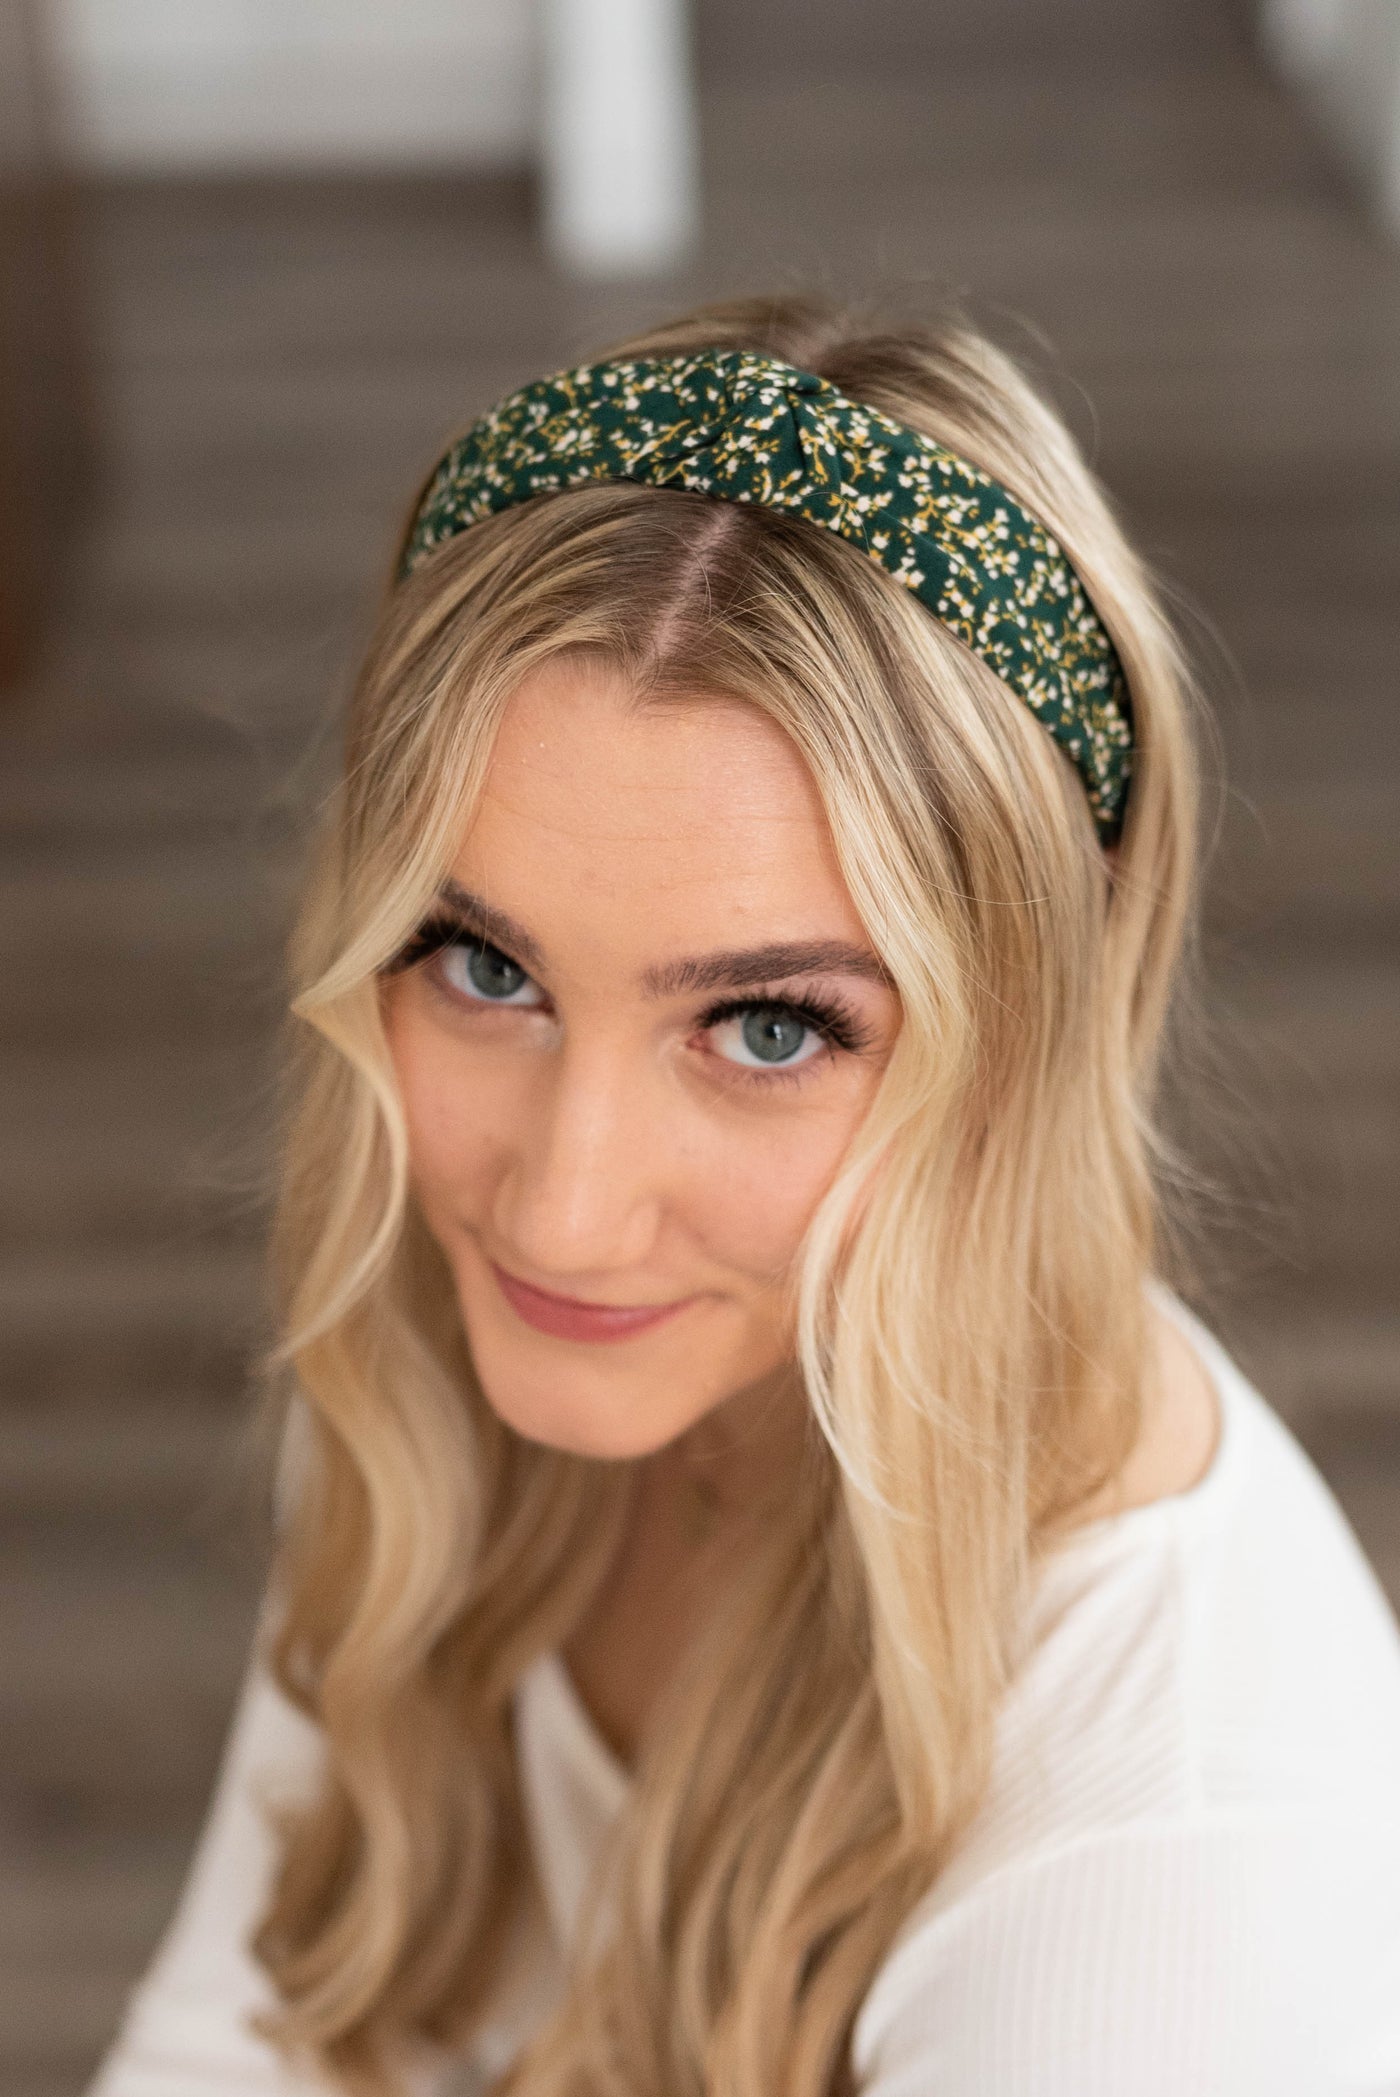 View of the dark green floral headband